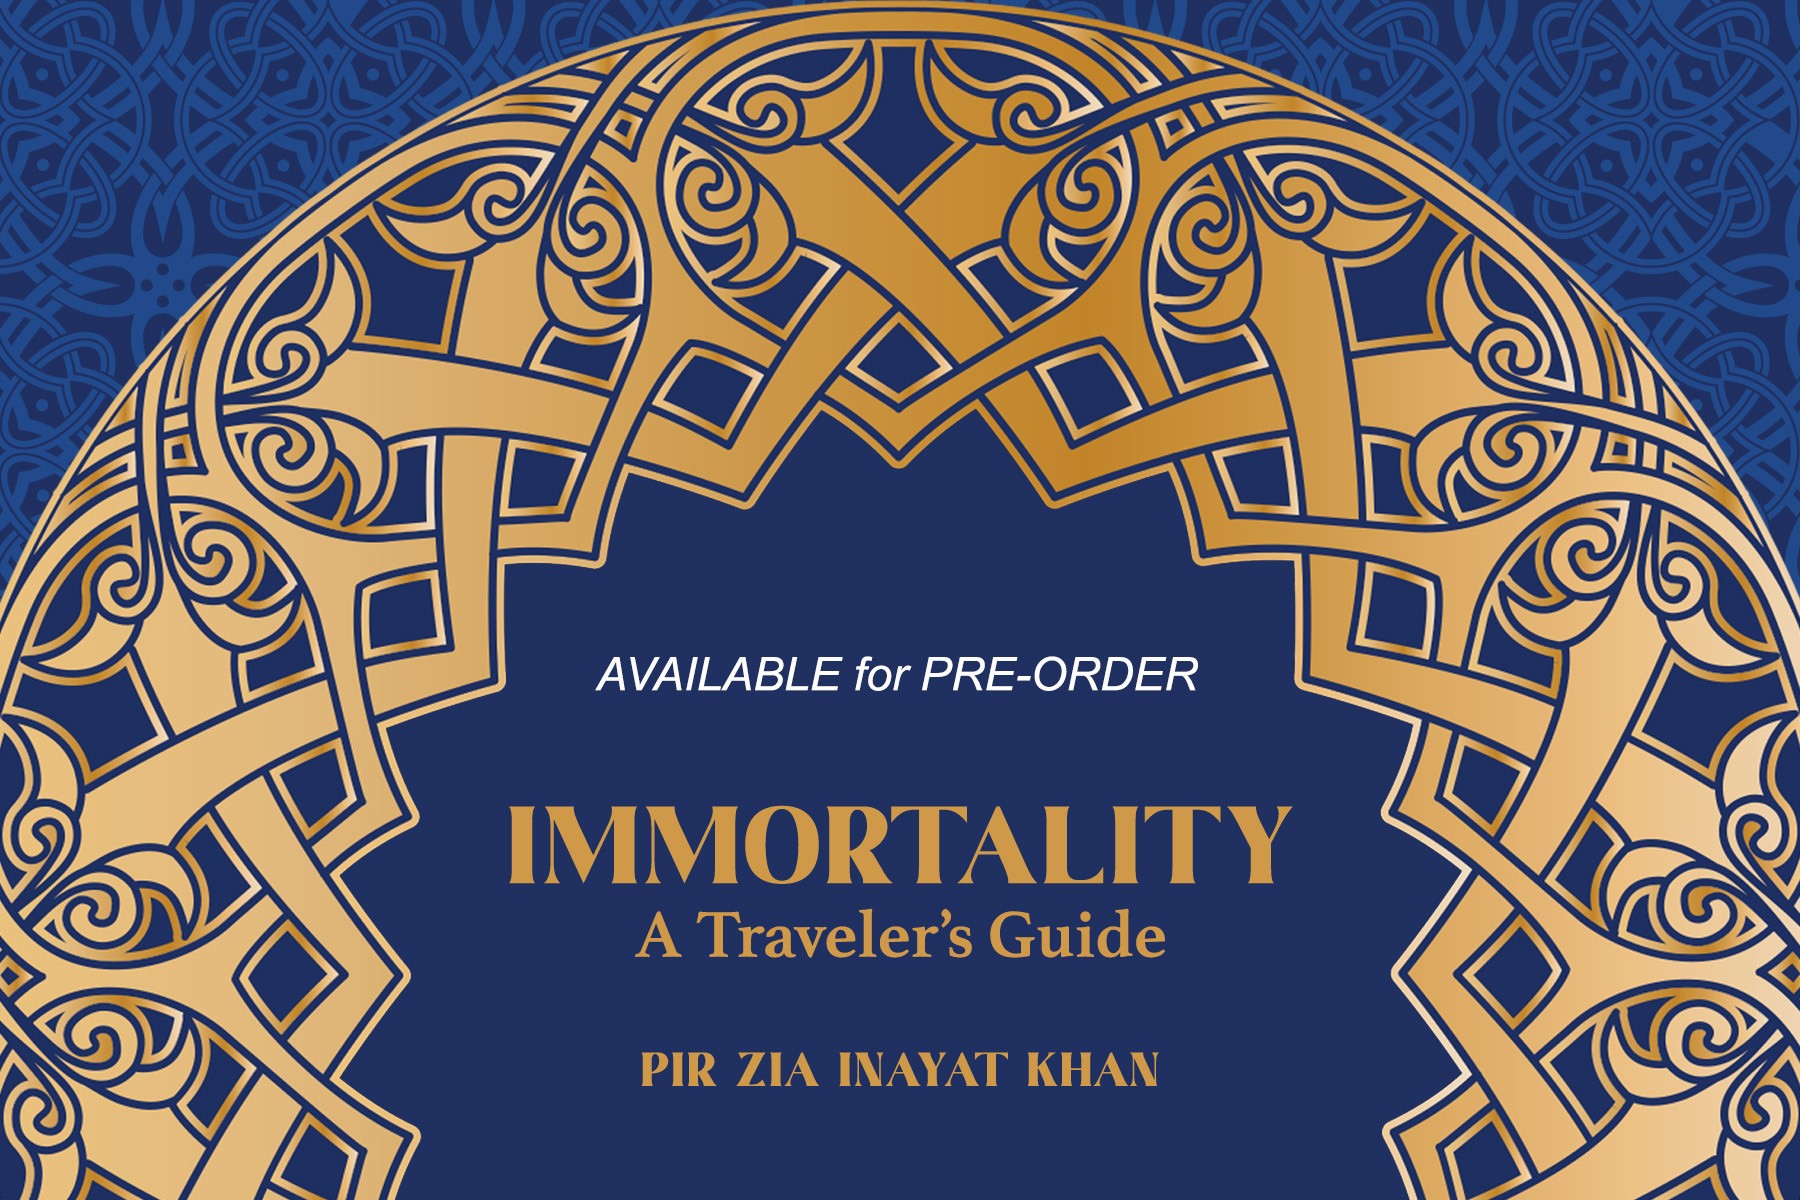 Immortality A Travelers Guide by Pir Zia Inayat Khan Coming Soon